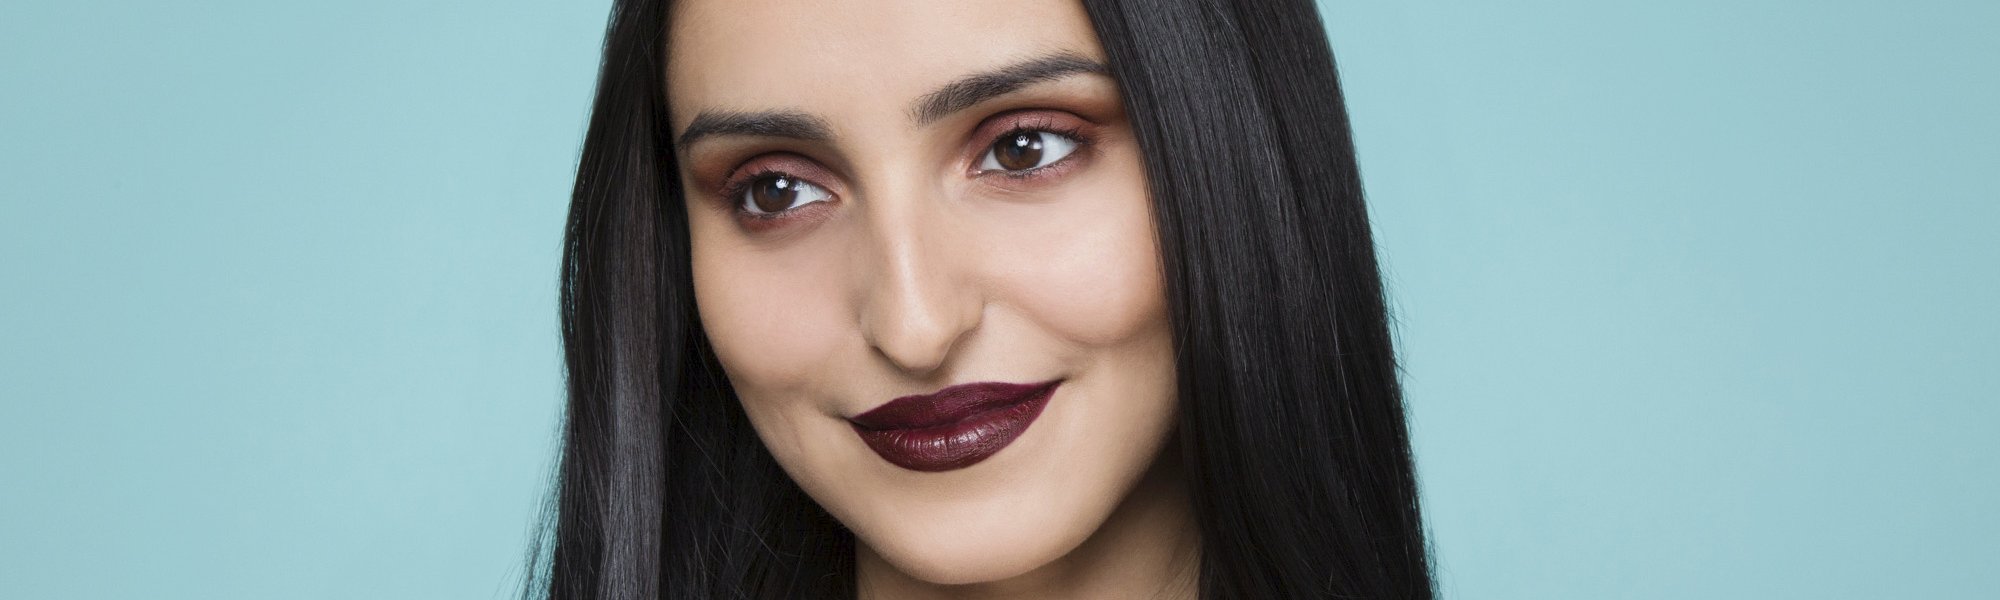 How To Wear Burgundy Makeup On Your Eyes Lips And Lashes